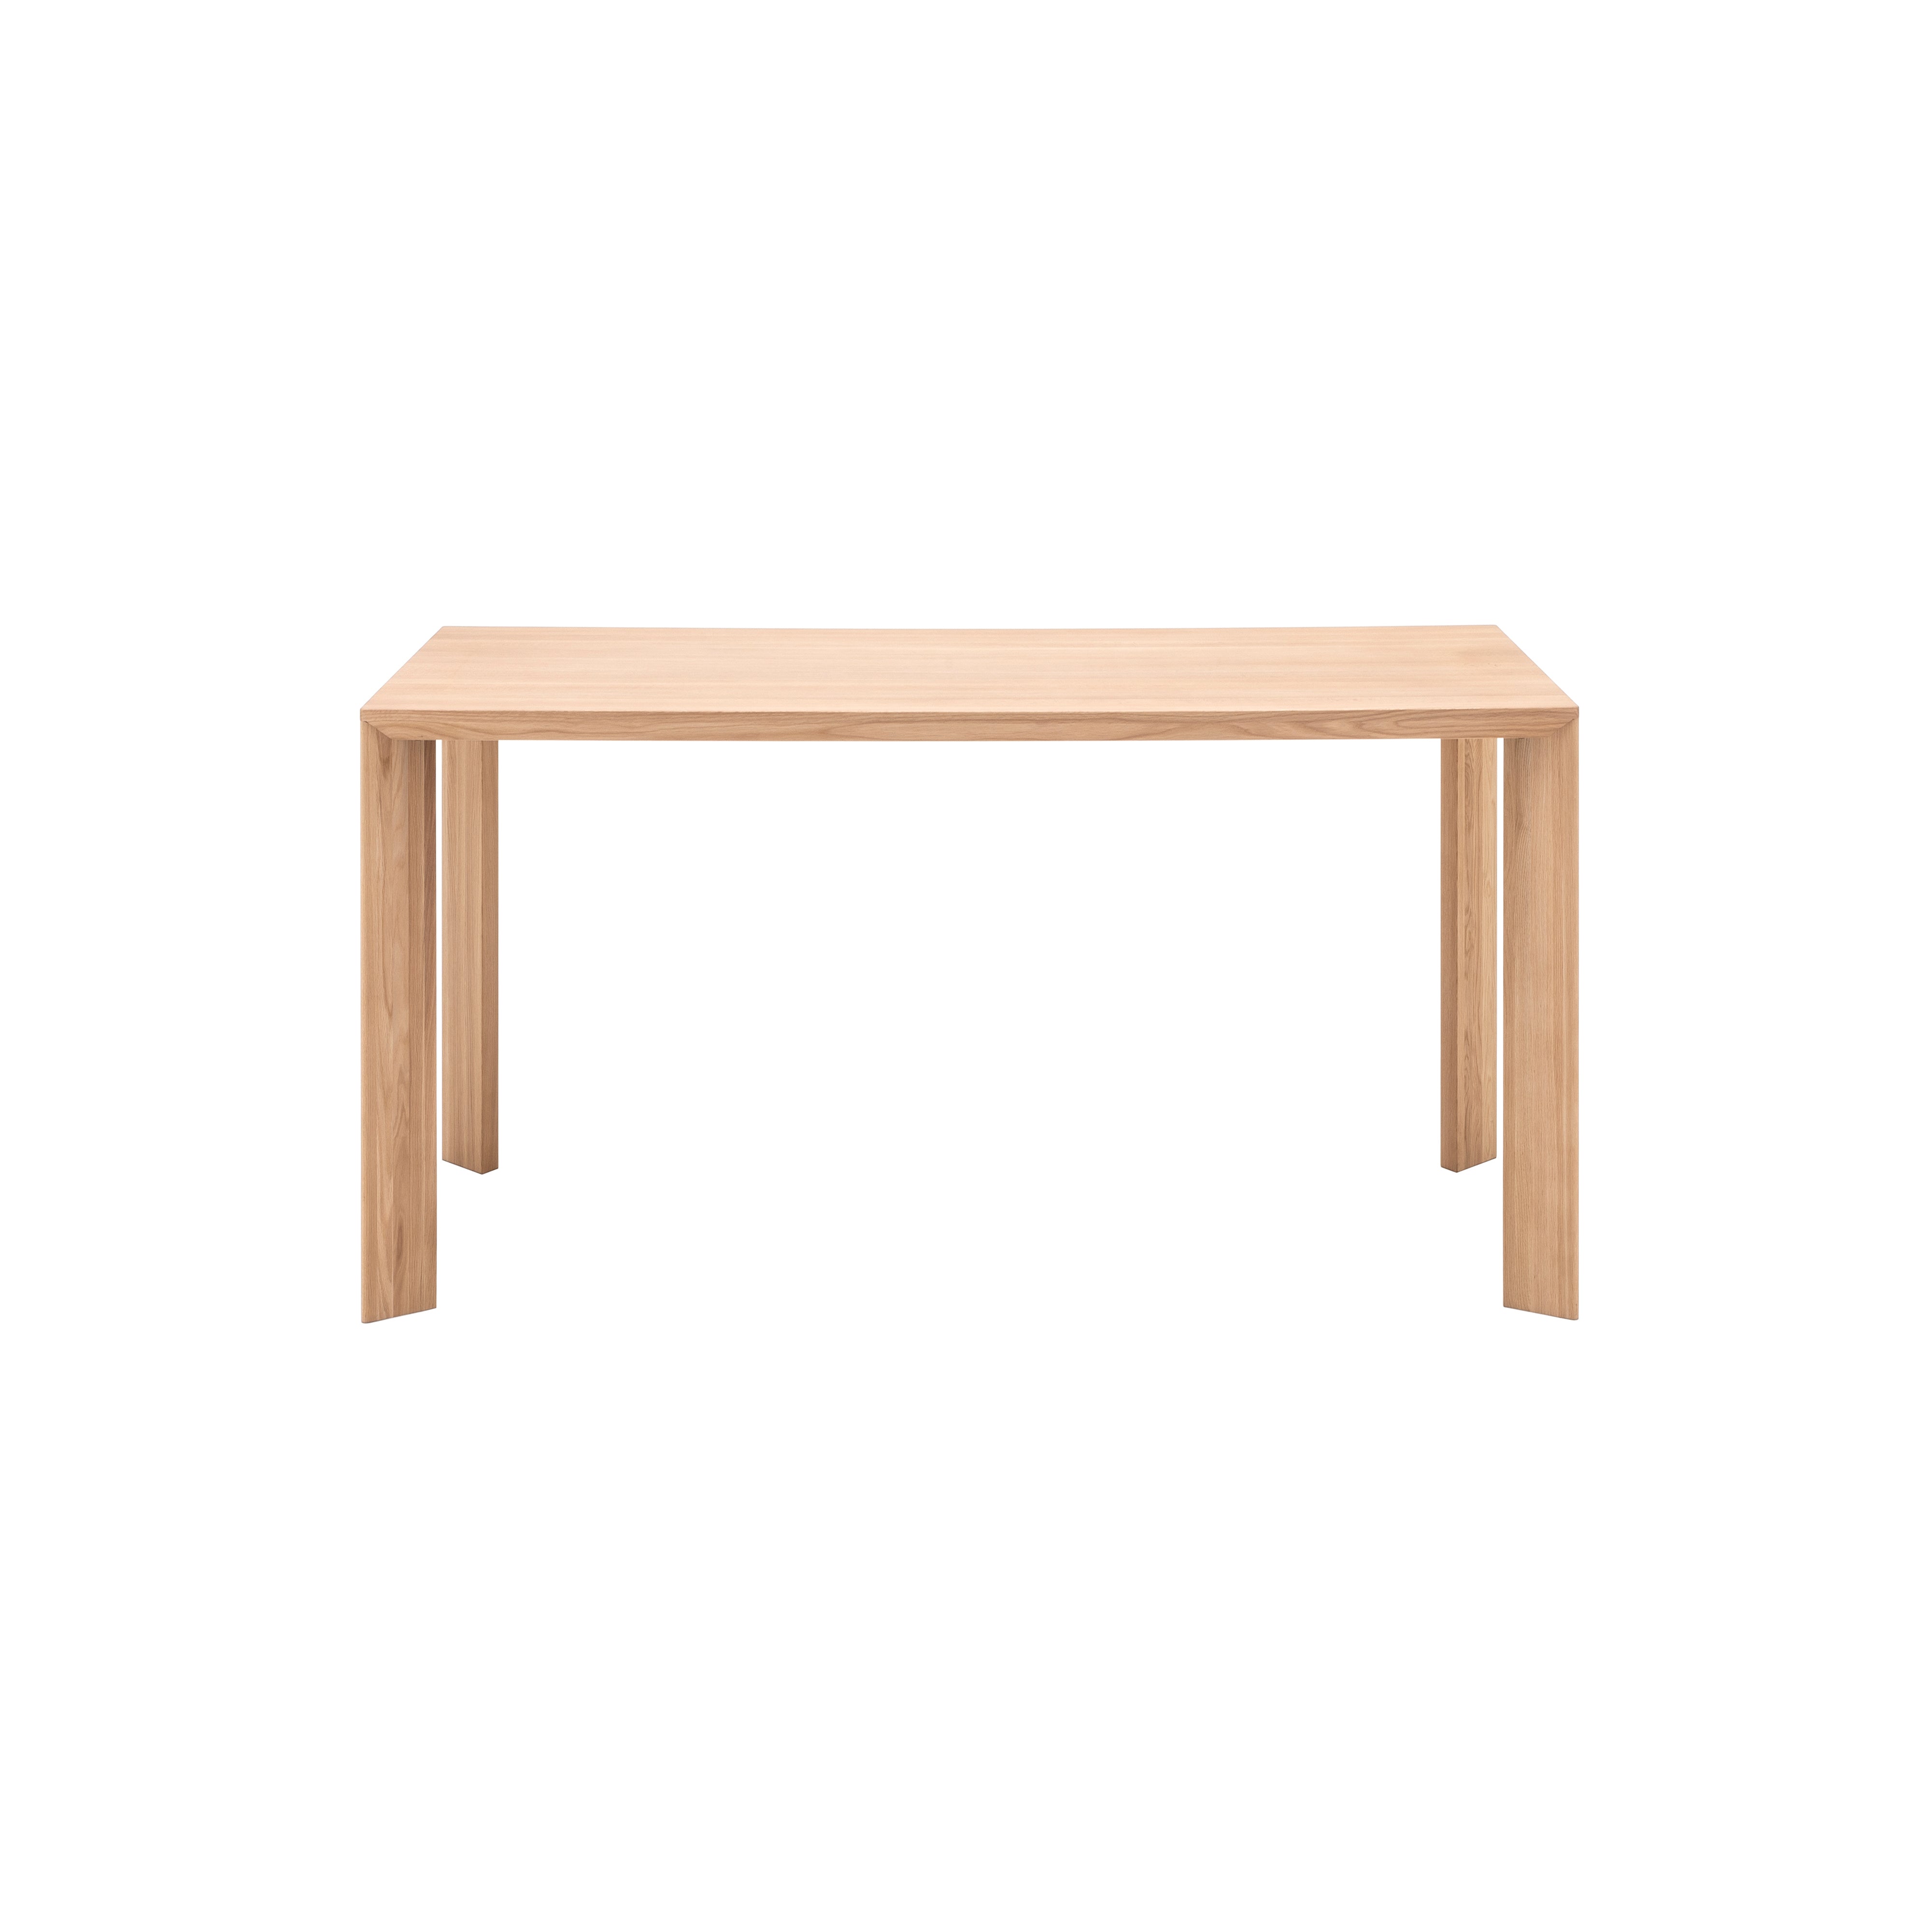 Azabu Residence Dining Table A-DT02: Small - 65